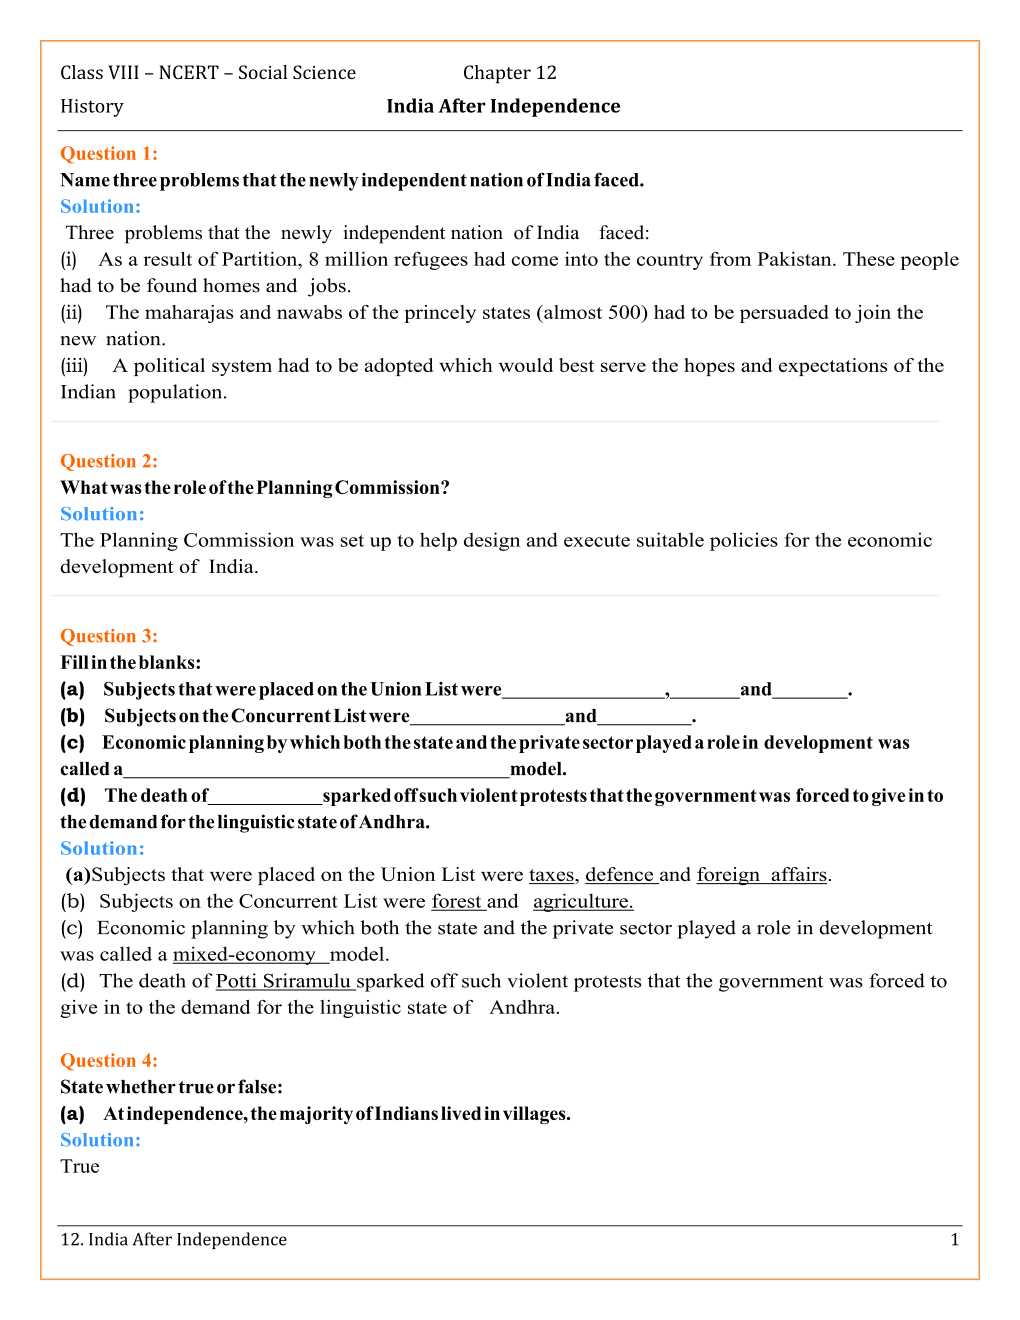 NCERT Solutions For Class 8 Social Science Our Pasts 3 Chapter 12 